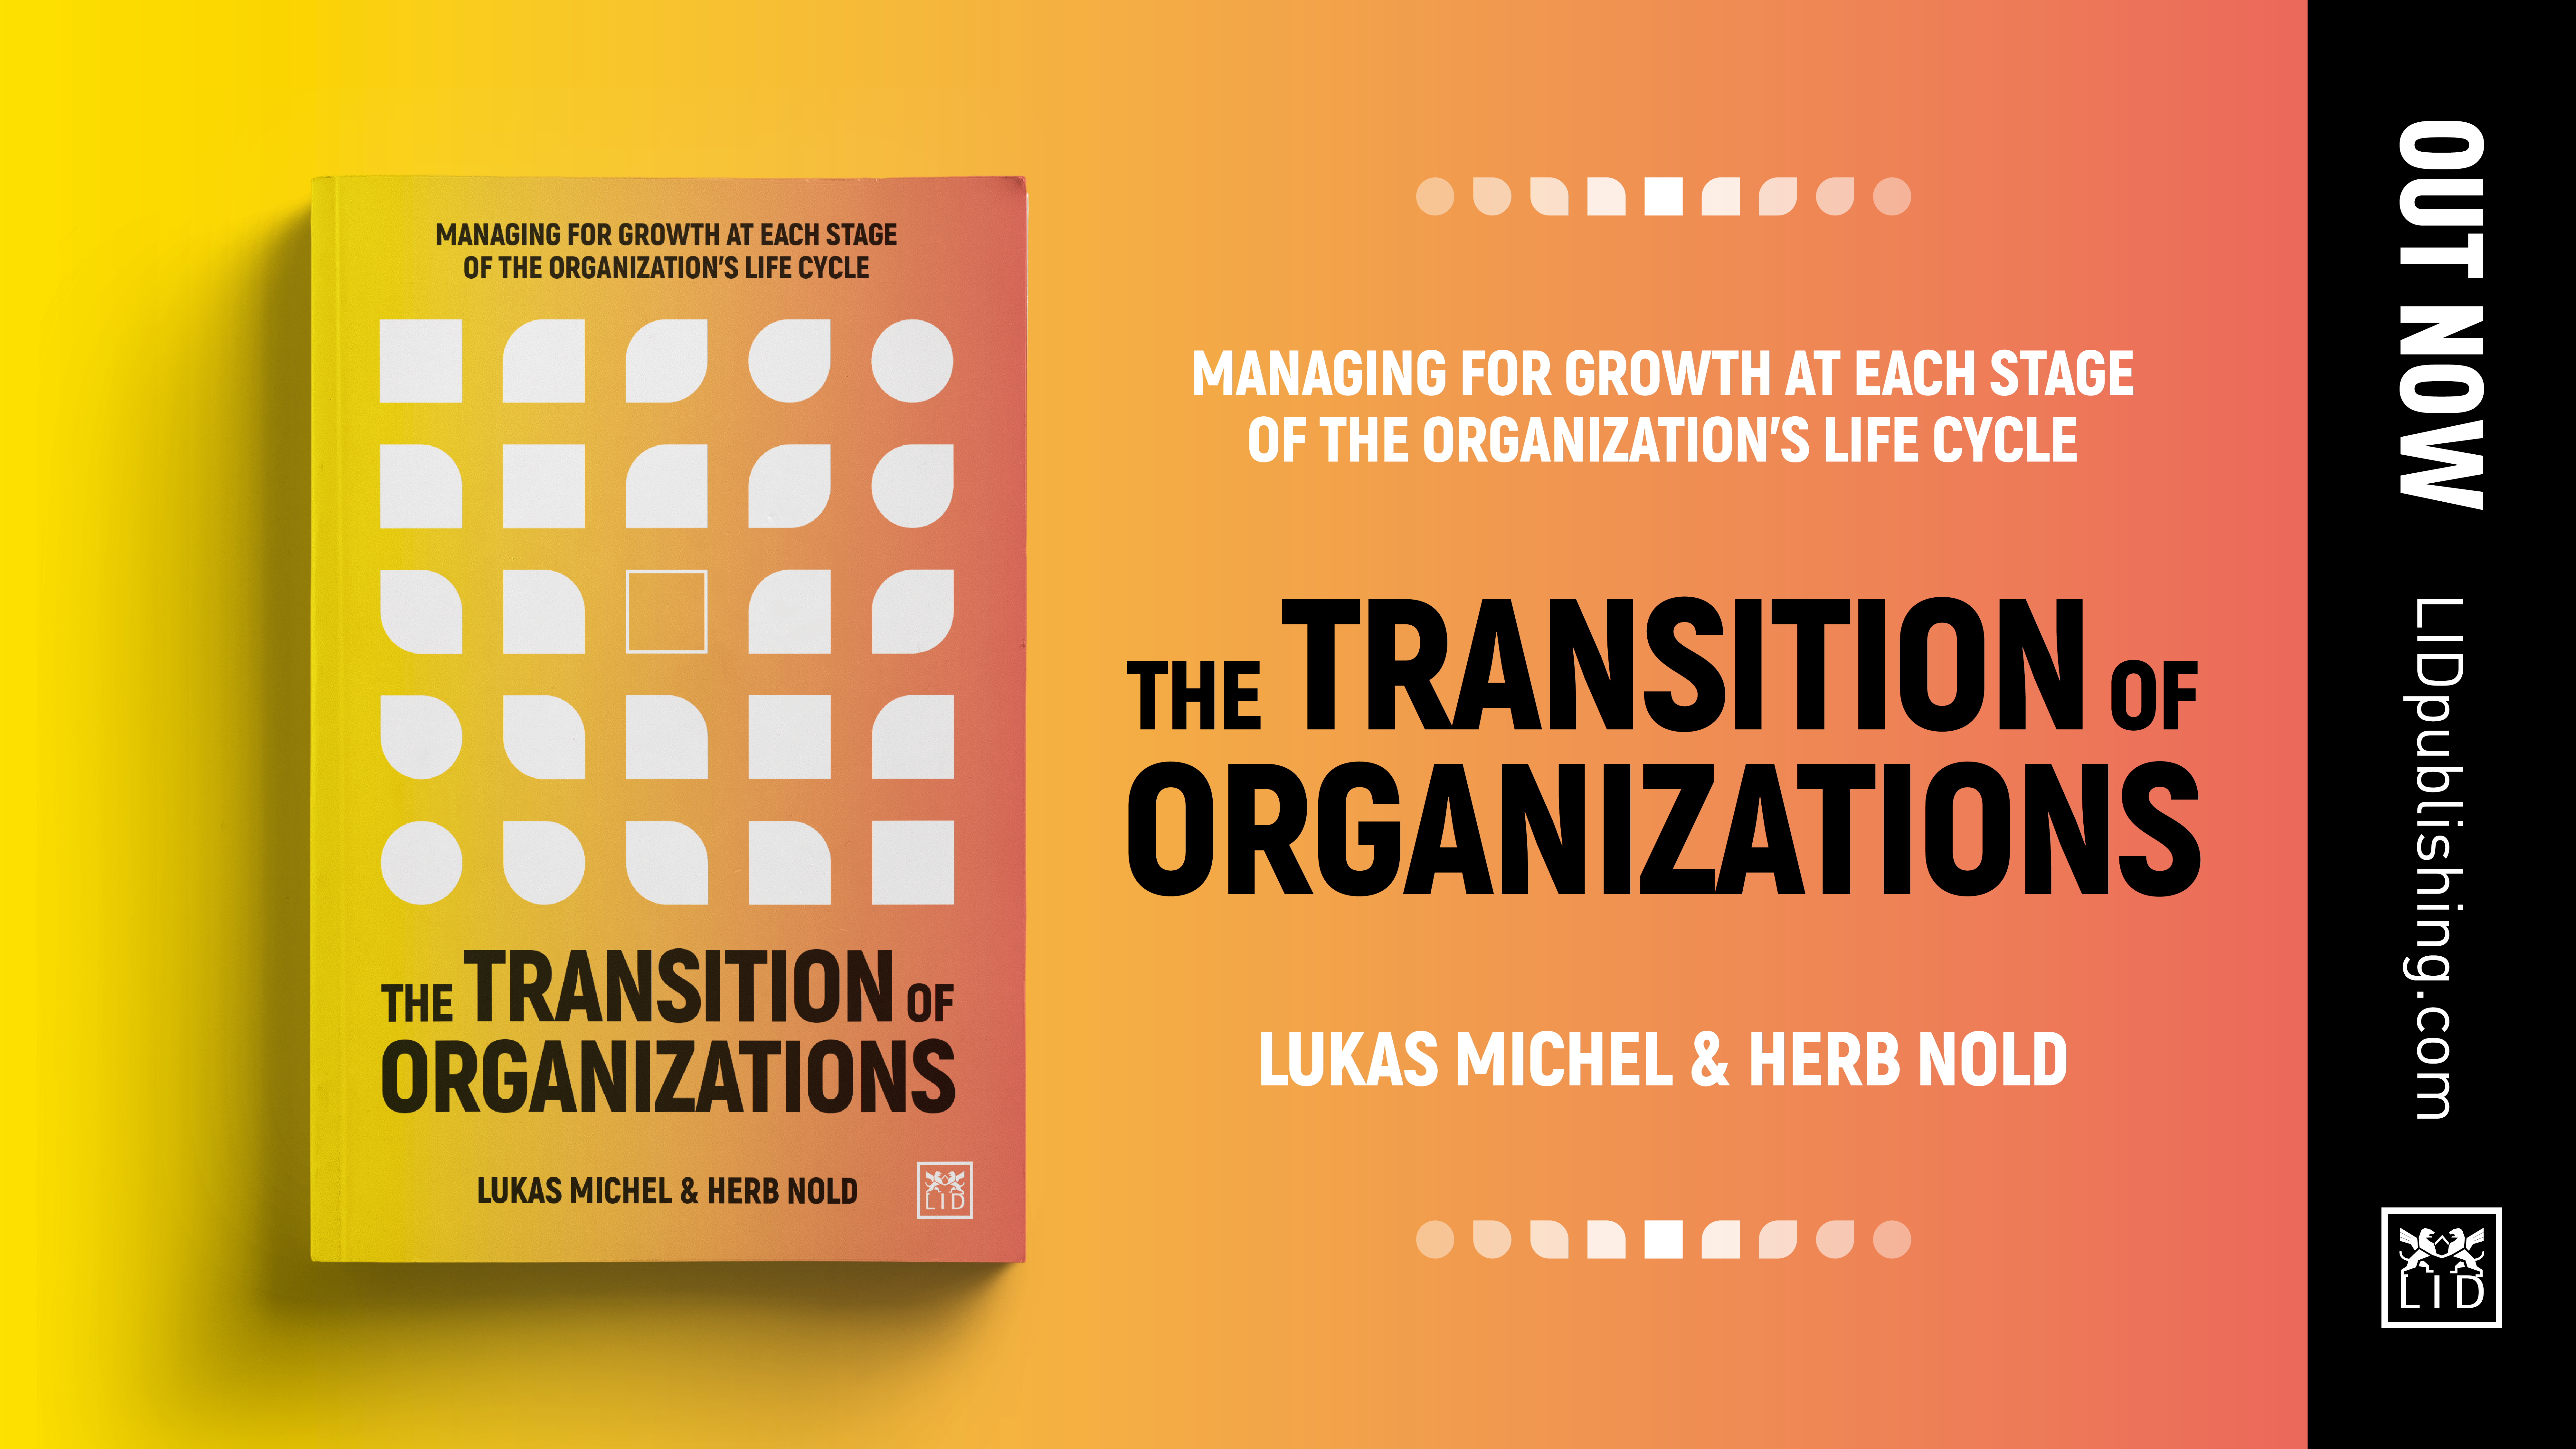 OUT NOW: THE TRANSITION OF ORGANIZATIONS